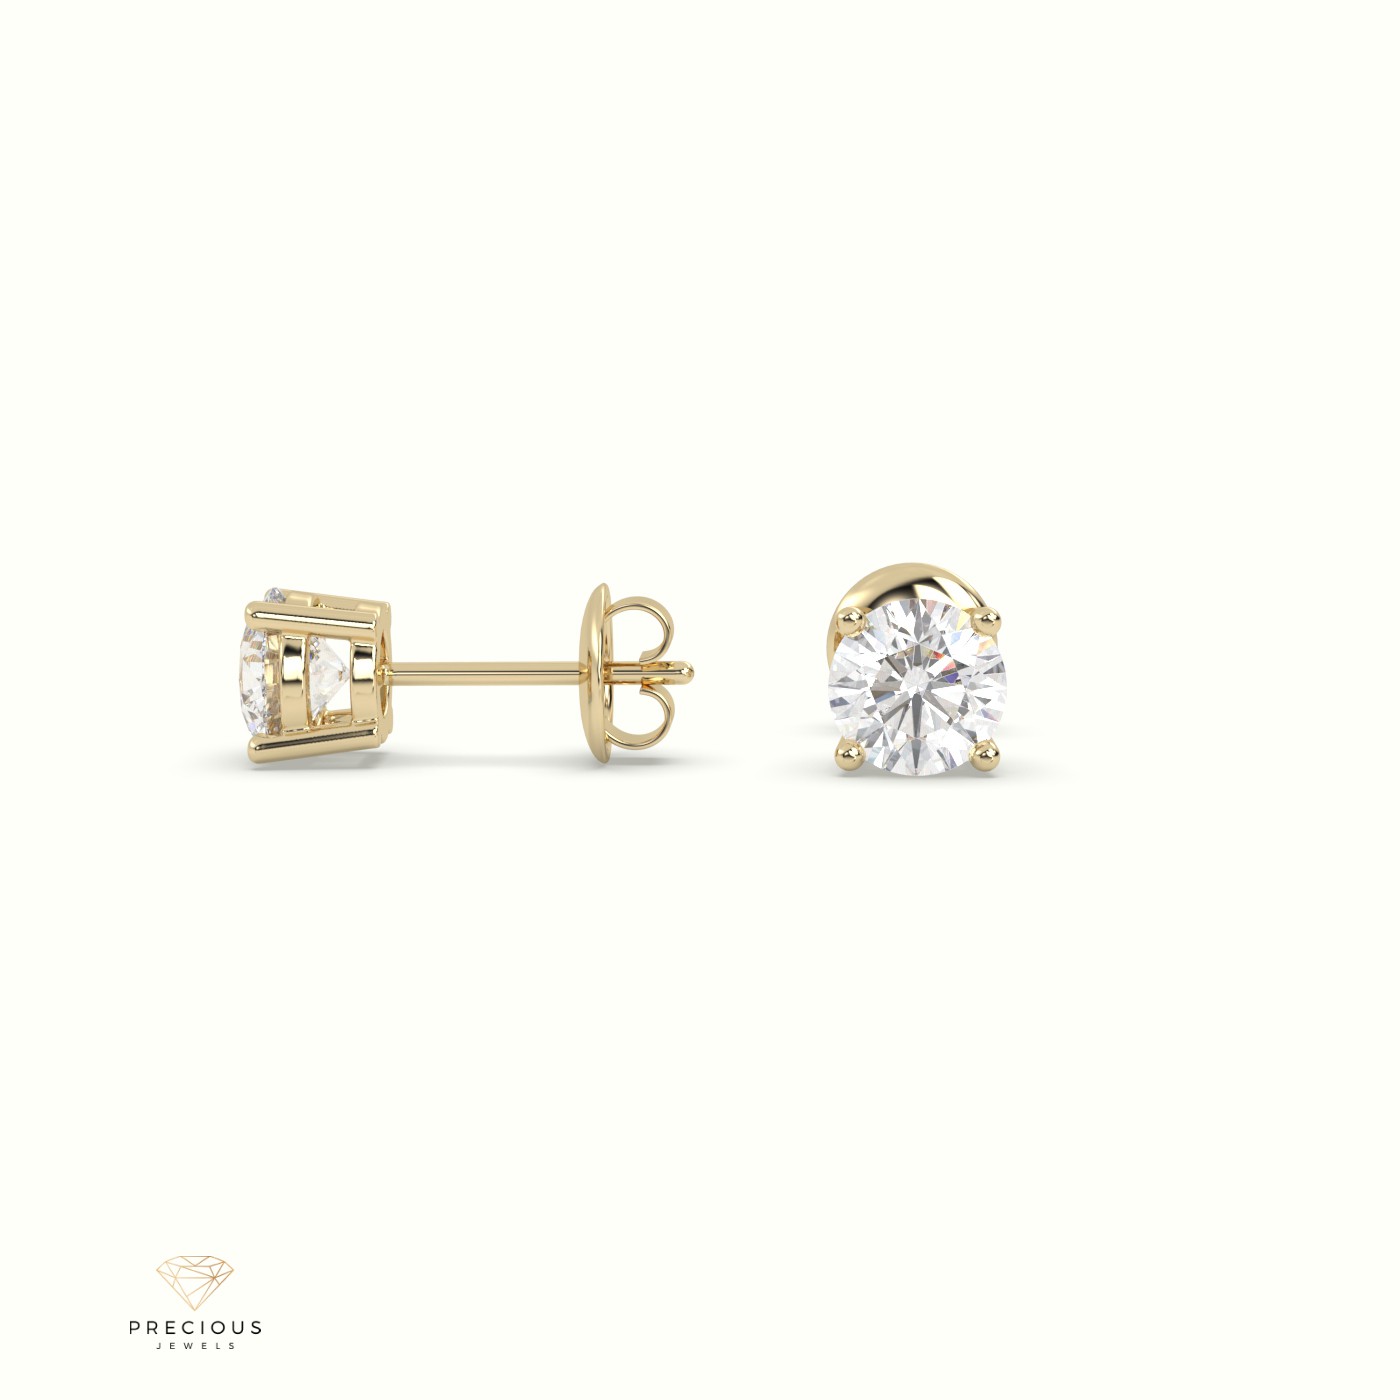 18k yellow gold 4 prongs classic round diamond earring studs Photos & images